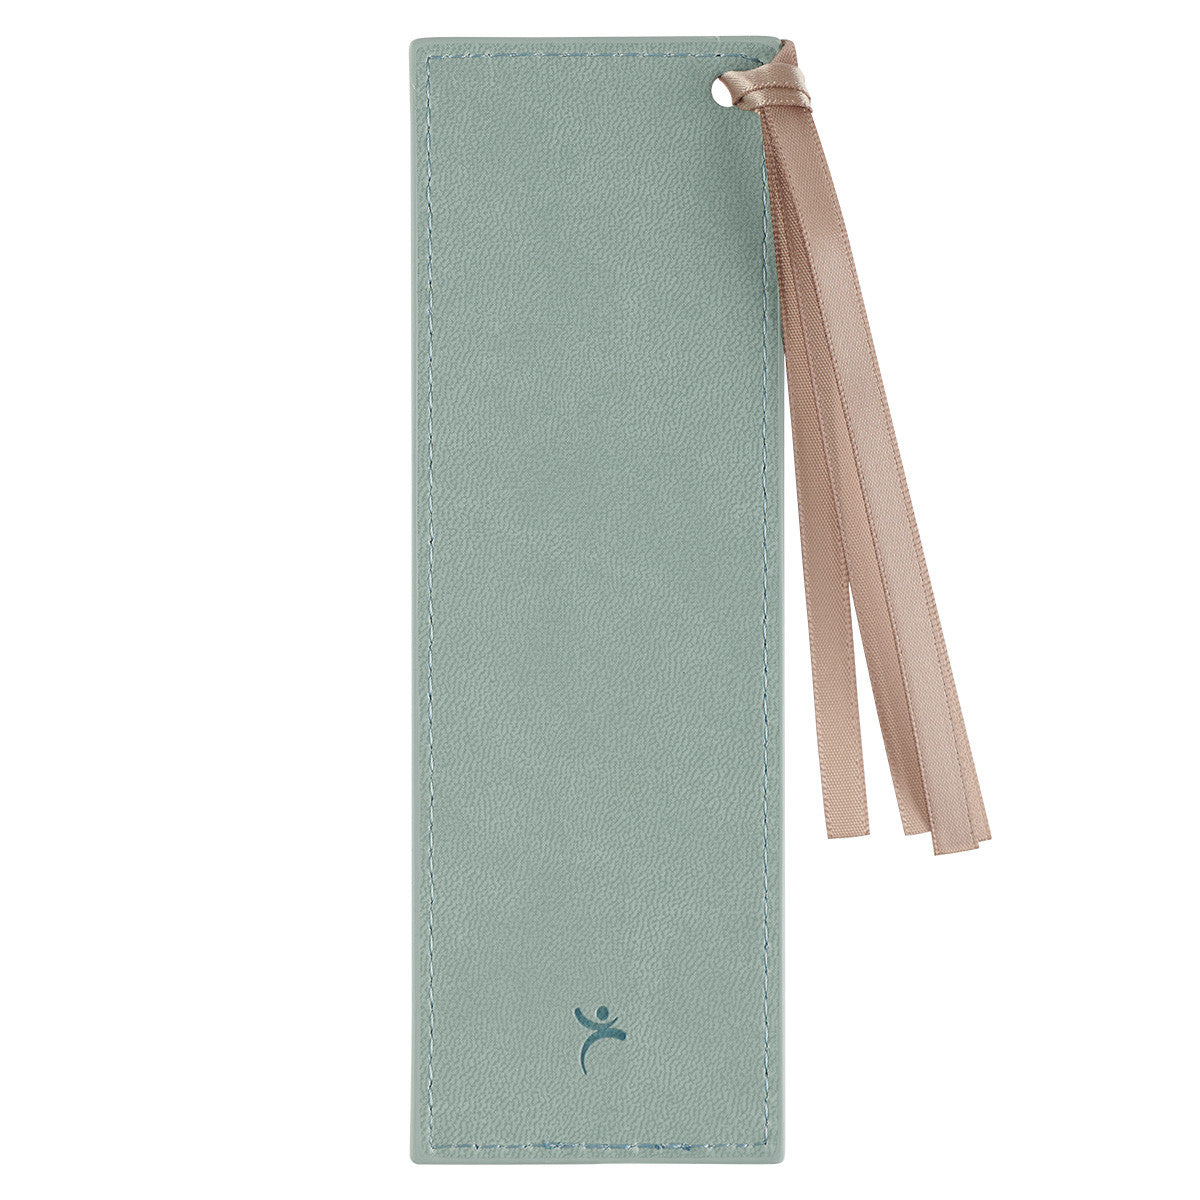 Live by Faith Teal Faux Leather Bookmark - 2 Corinthians 5:6-7 - The Christian Gift Company